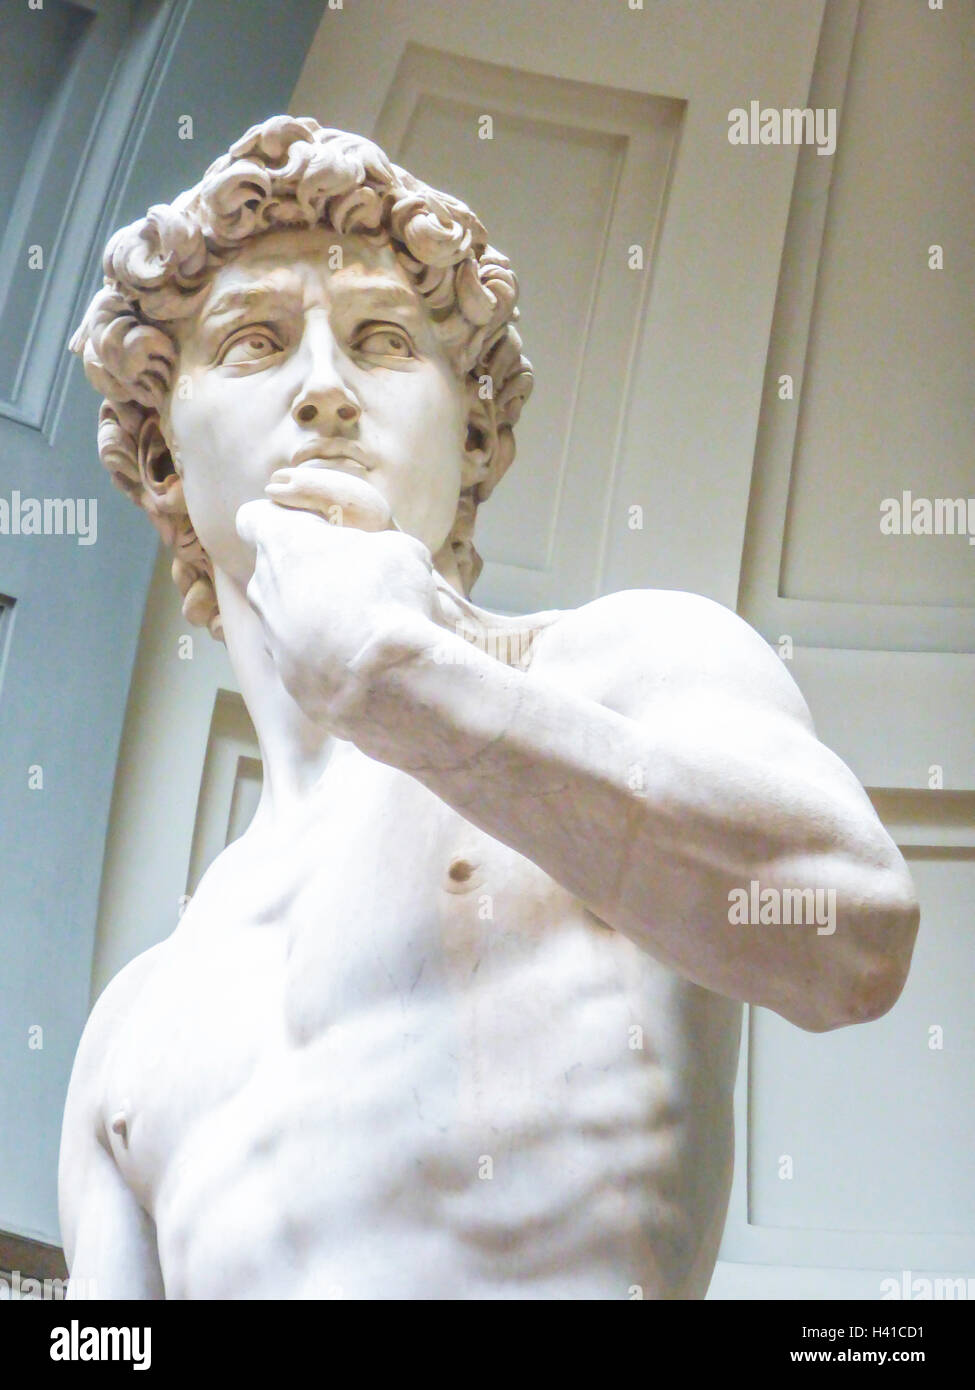 Michelango's marble statue David in Accademia Gallery Florence, Italy Stock Photo